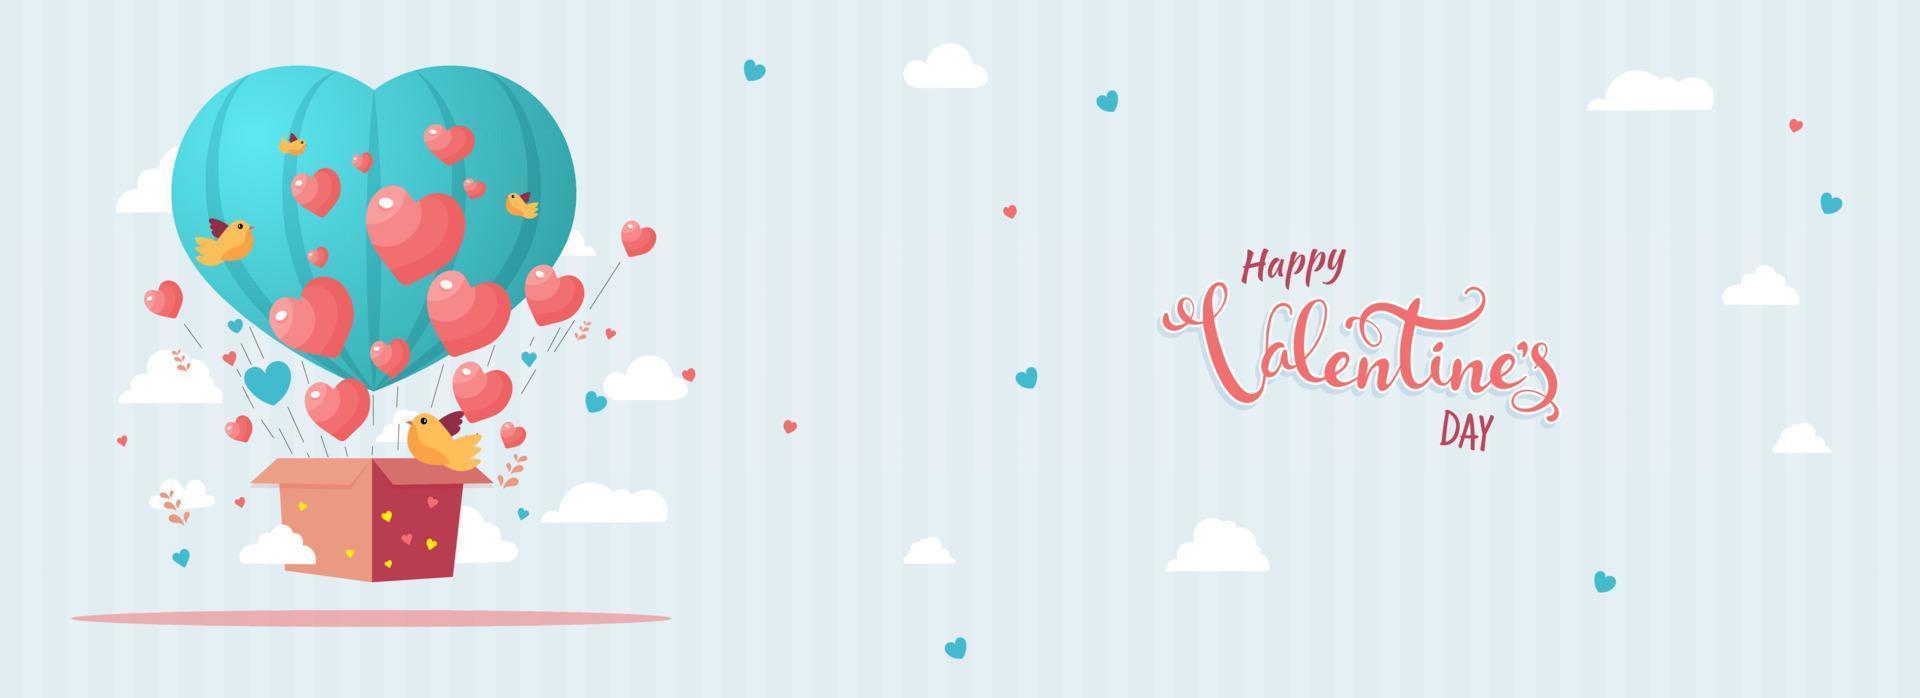 Happy Valentine's Day Concept With Heart Shapes Coming Out of Cardboard Box, Flying Birds, Clouds Decorated On Stripe Pattern Background. vector